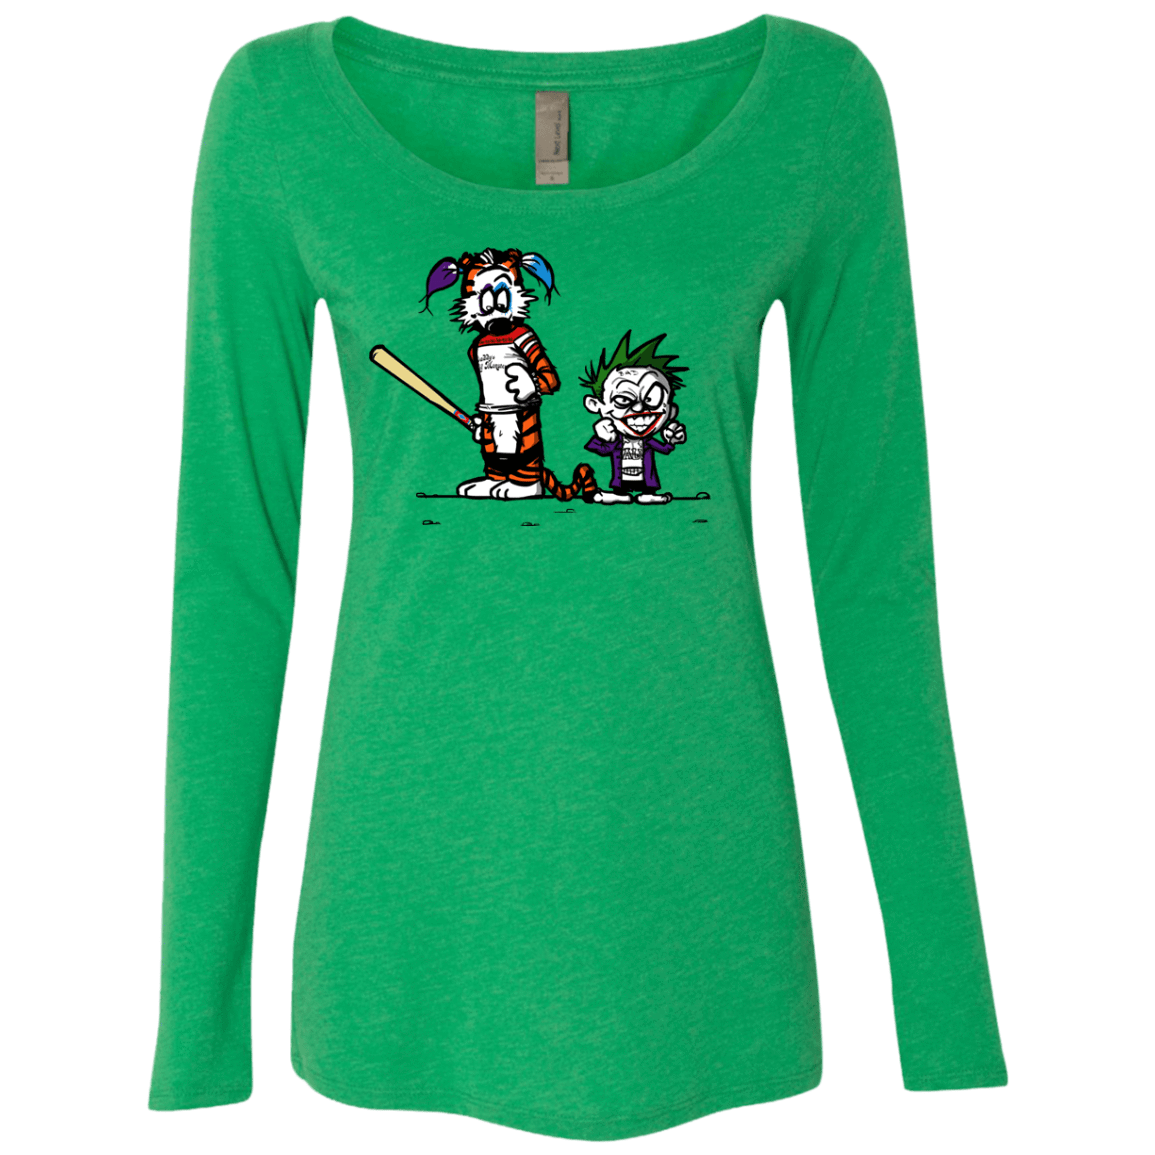 T-Shirts Envy / Small Suicide Tandem Women's Triblend Long Sleeve Shirt